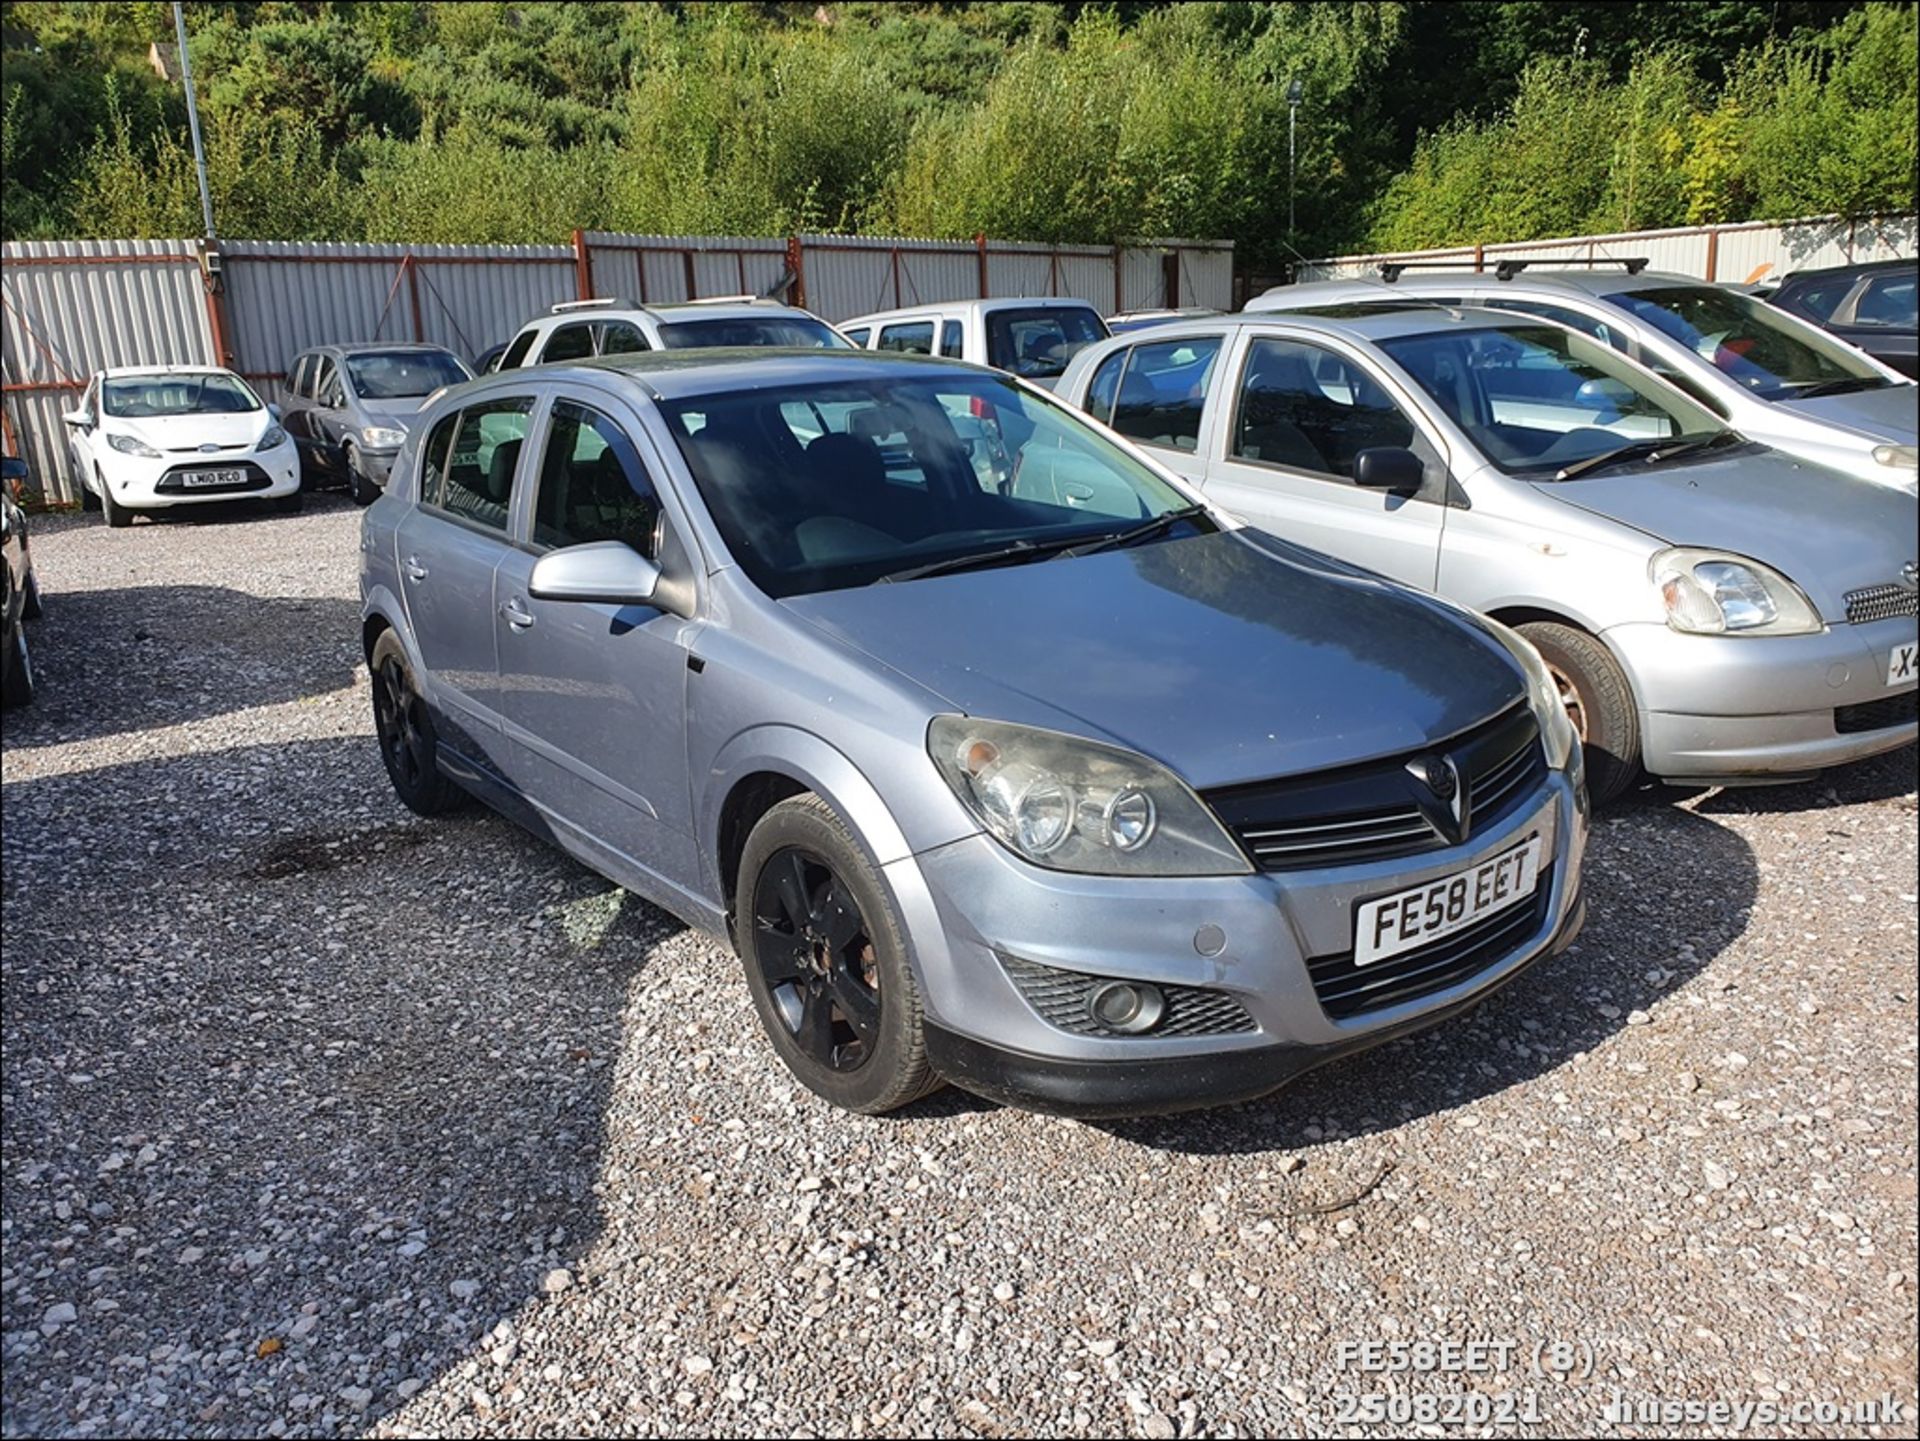 08/58 VAUXHALL ASTRA CLUB CDTI 100 - 1686cc 5dr Hatchback (Silver, 115k) - Image 8 of 15